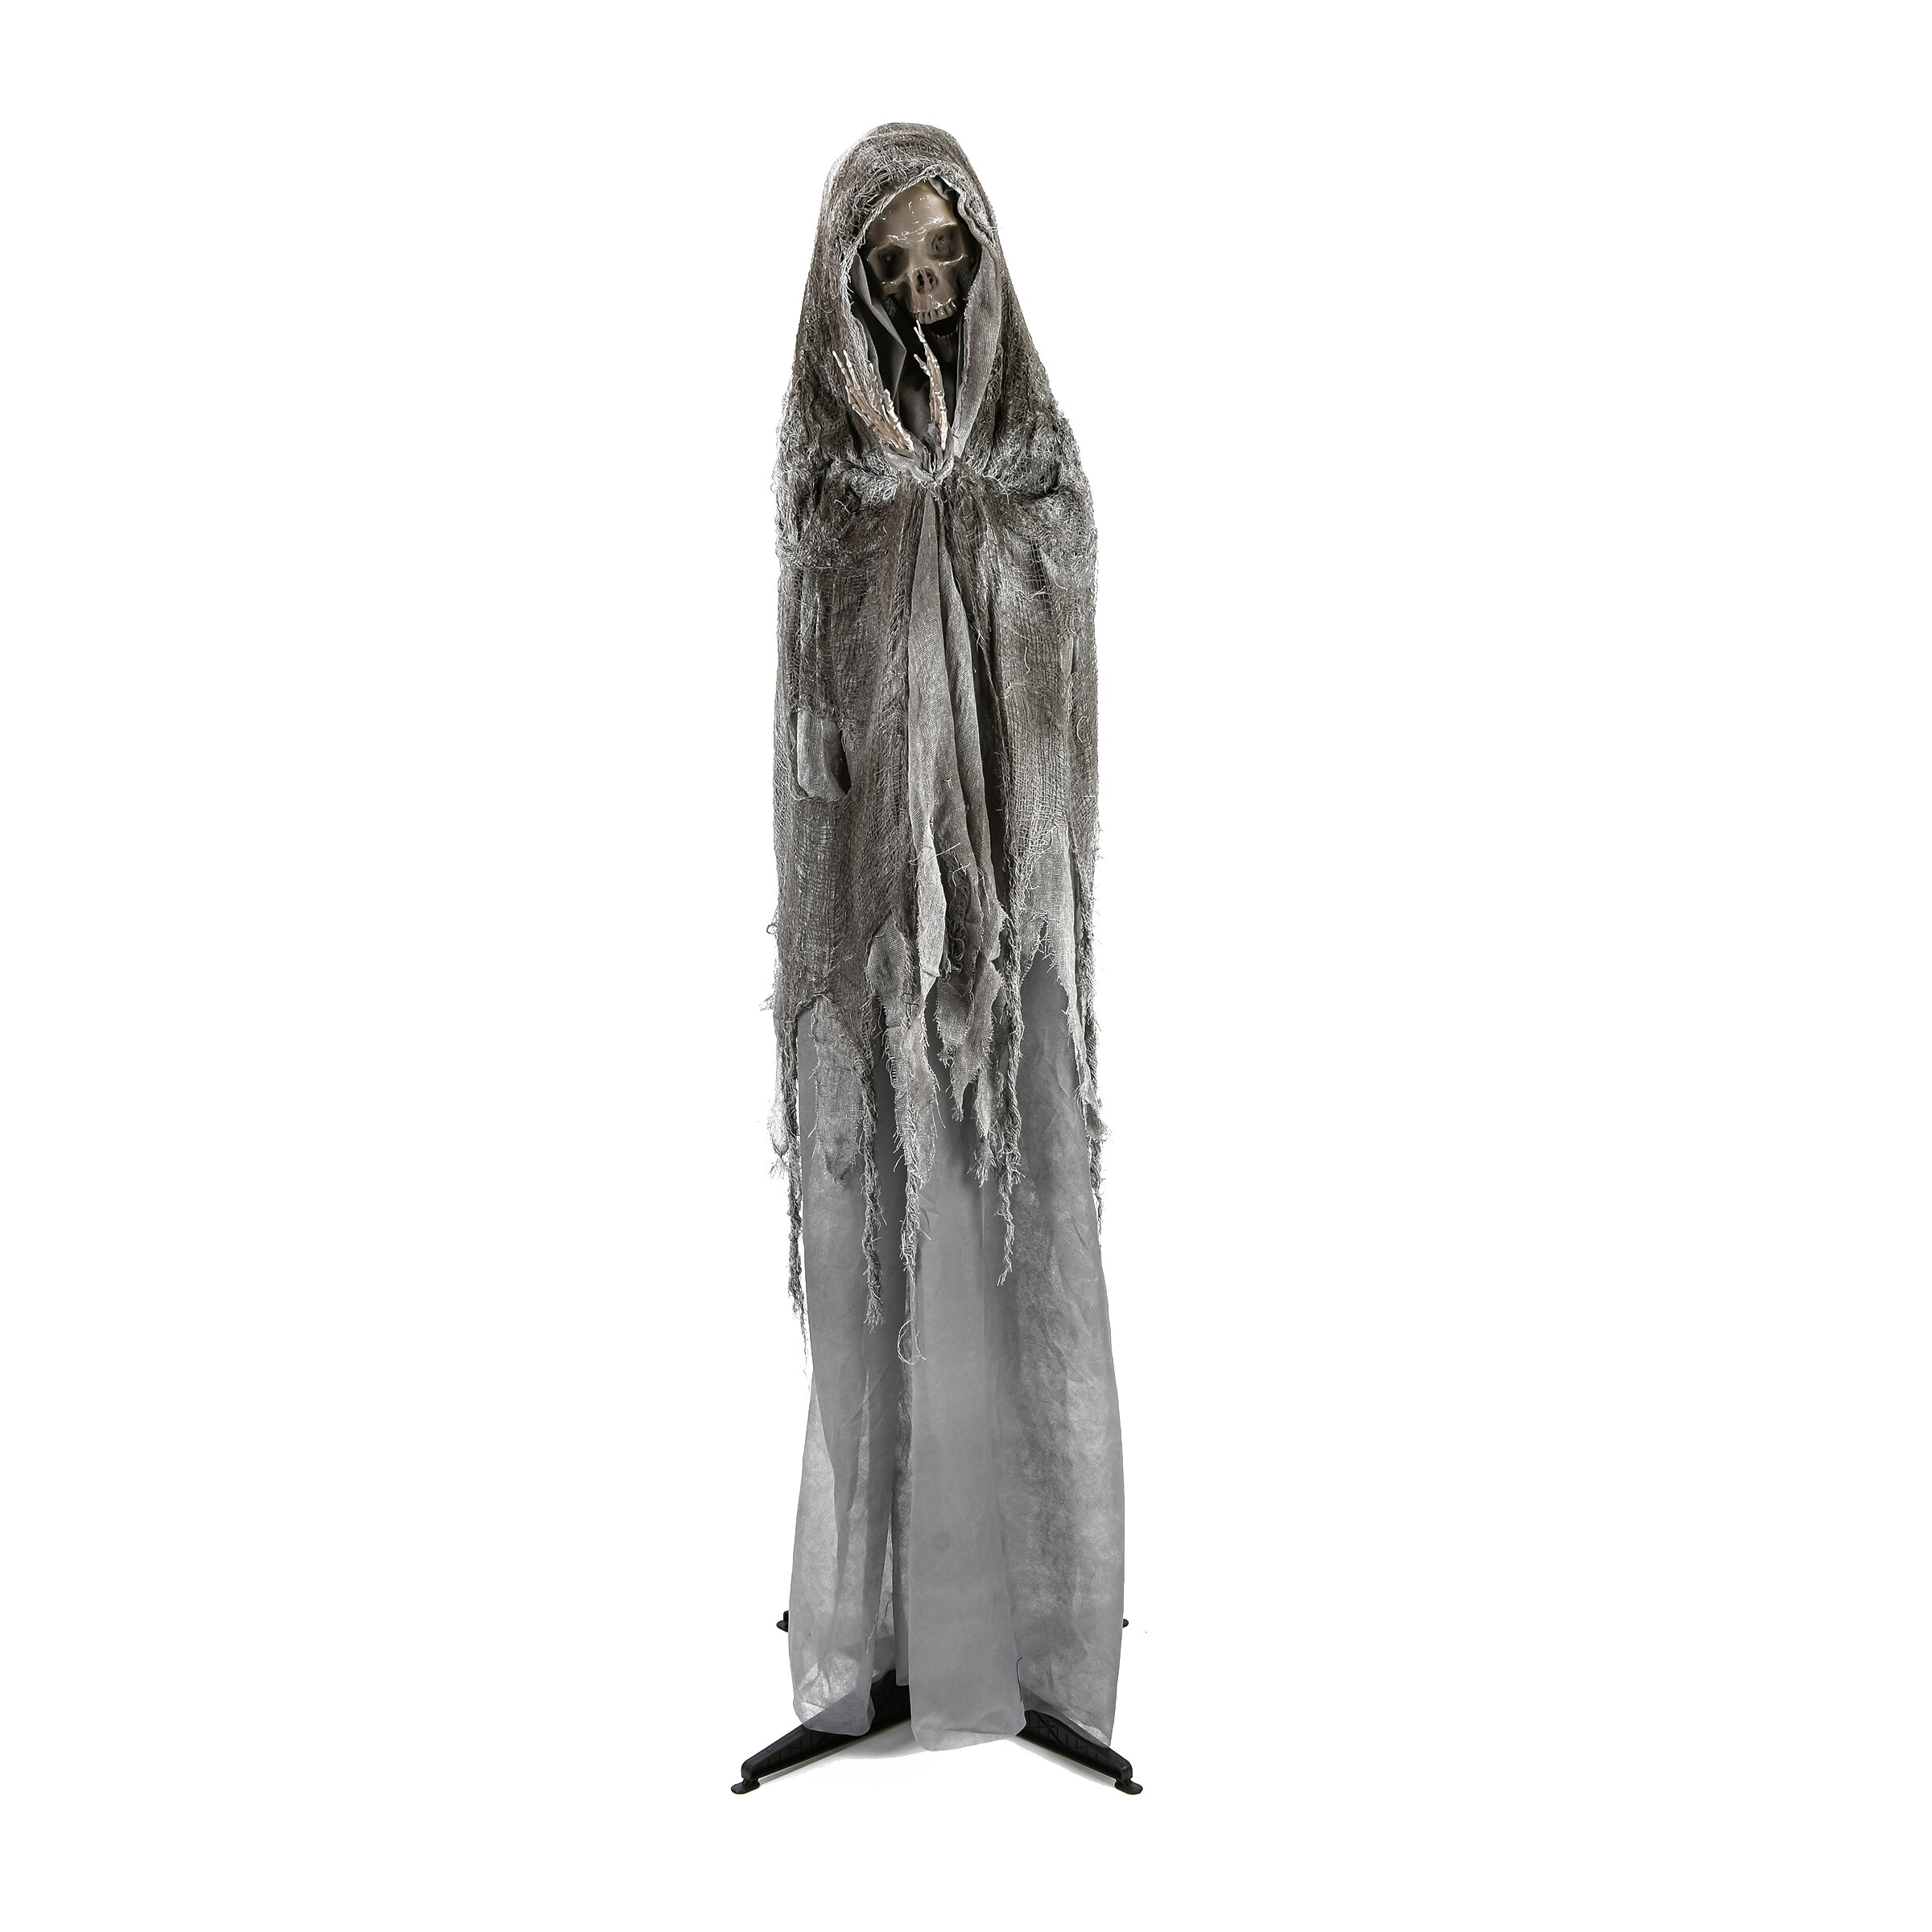 Hanging decoration Outdoor Halloween Decorations & Inflatables at Lowes.com